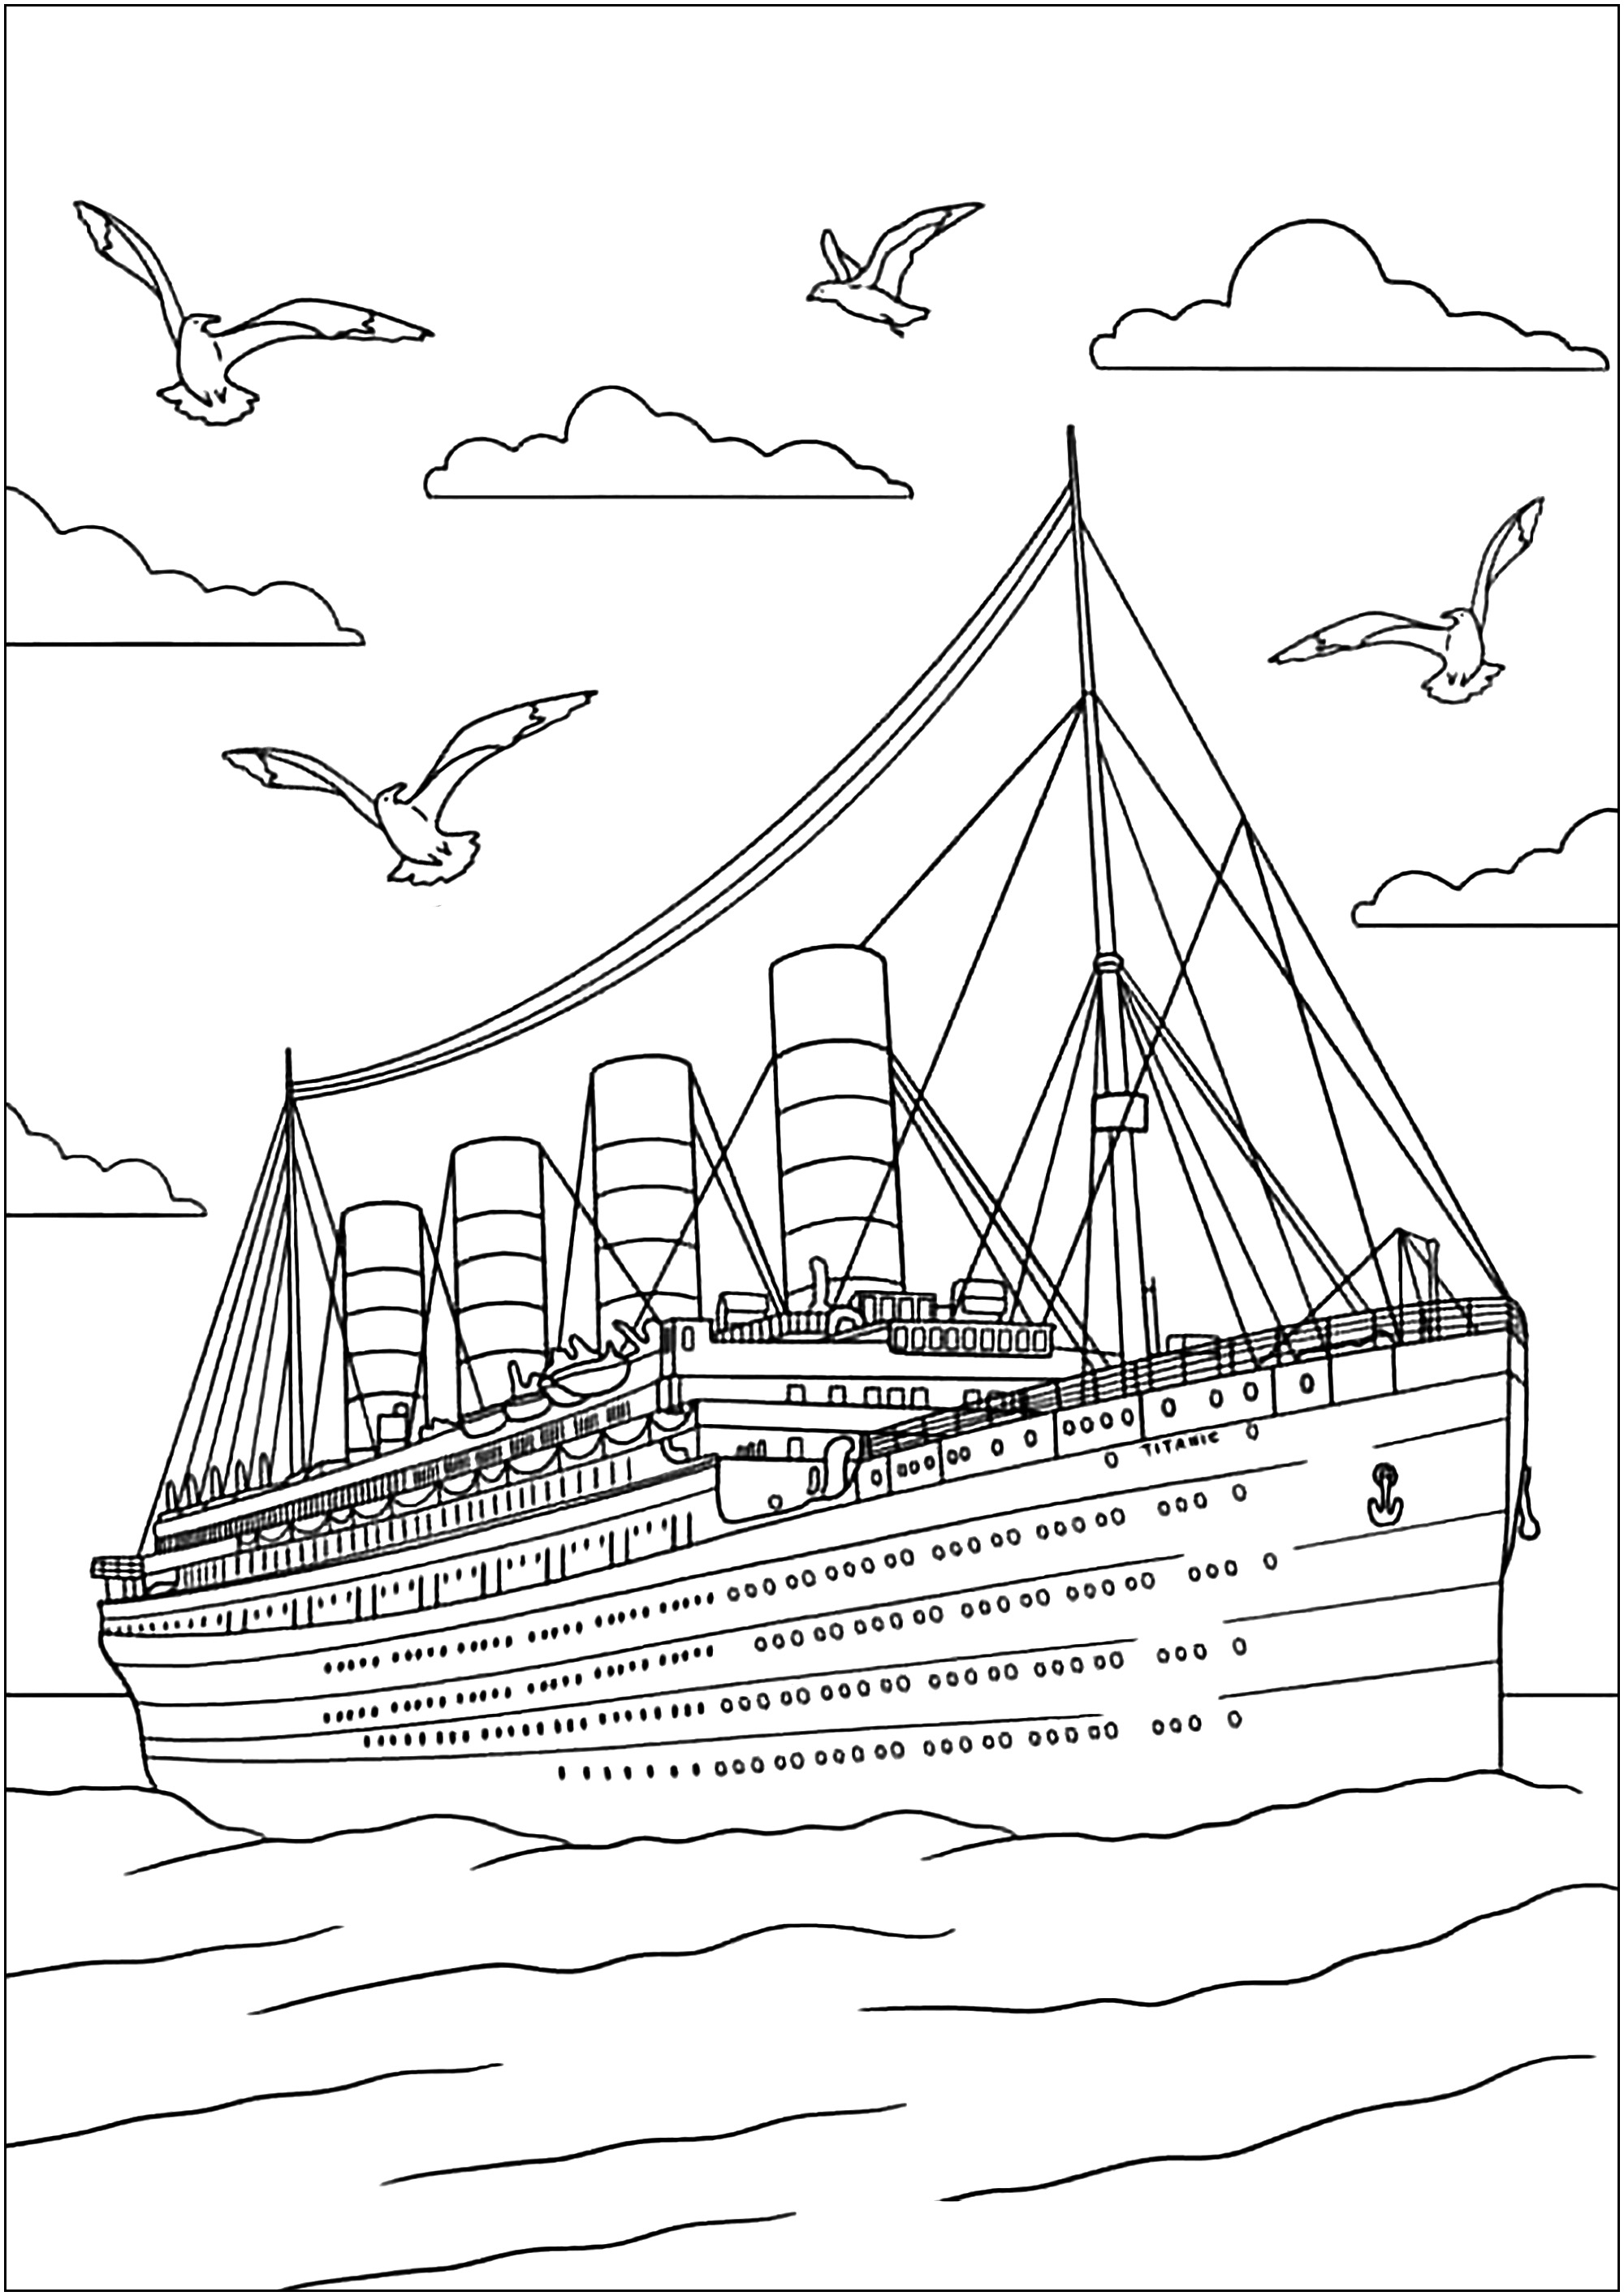 Magnificent, highly detailed drawing of the Titanic